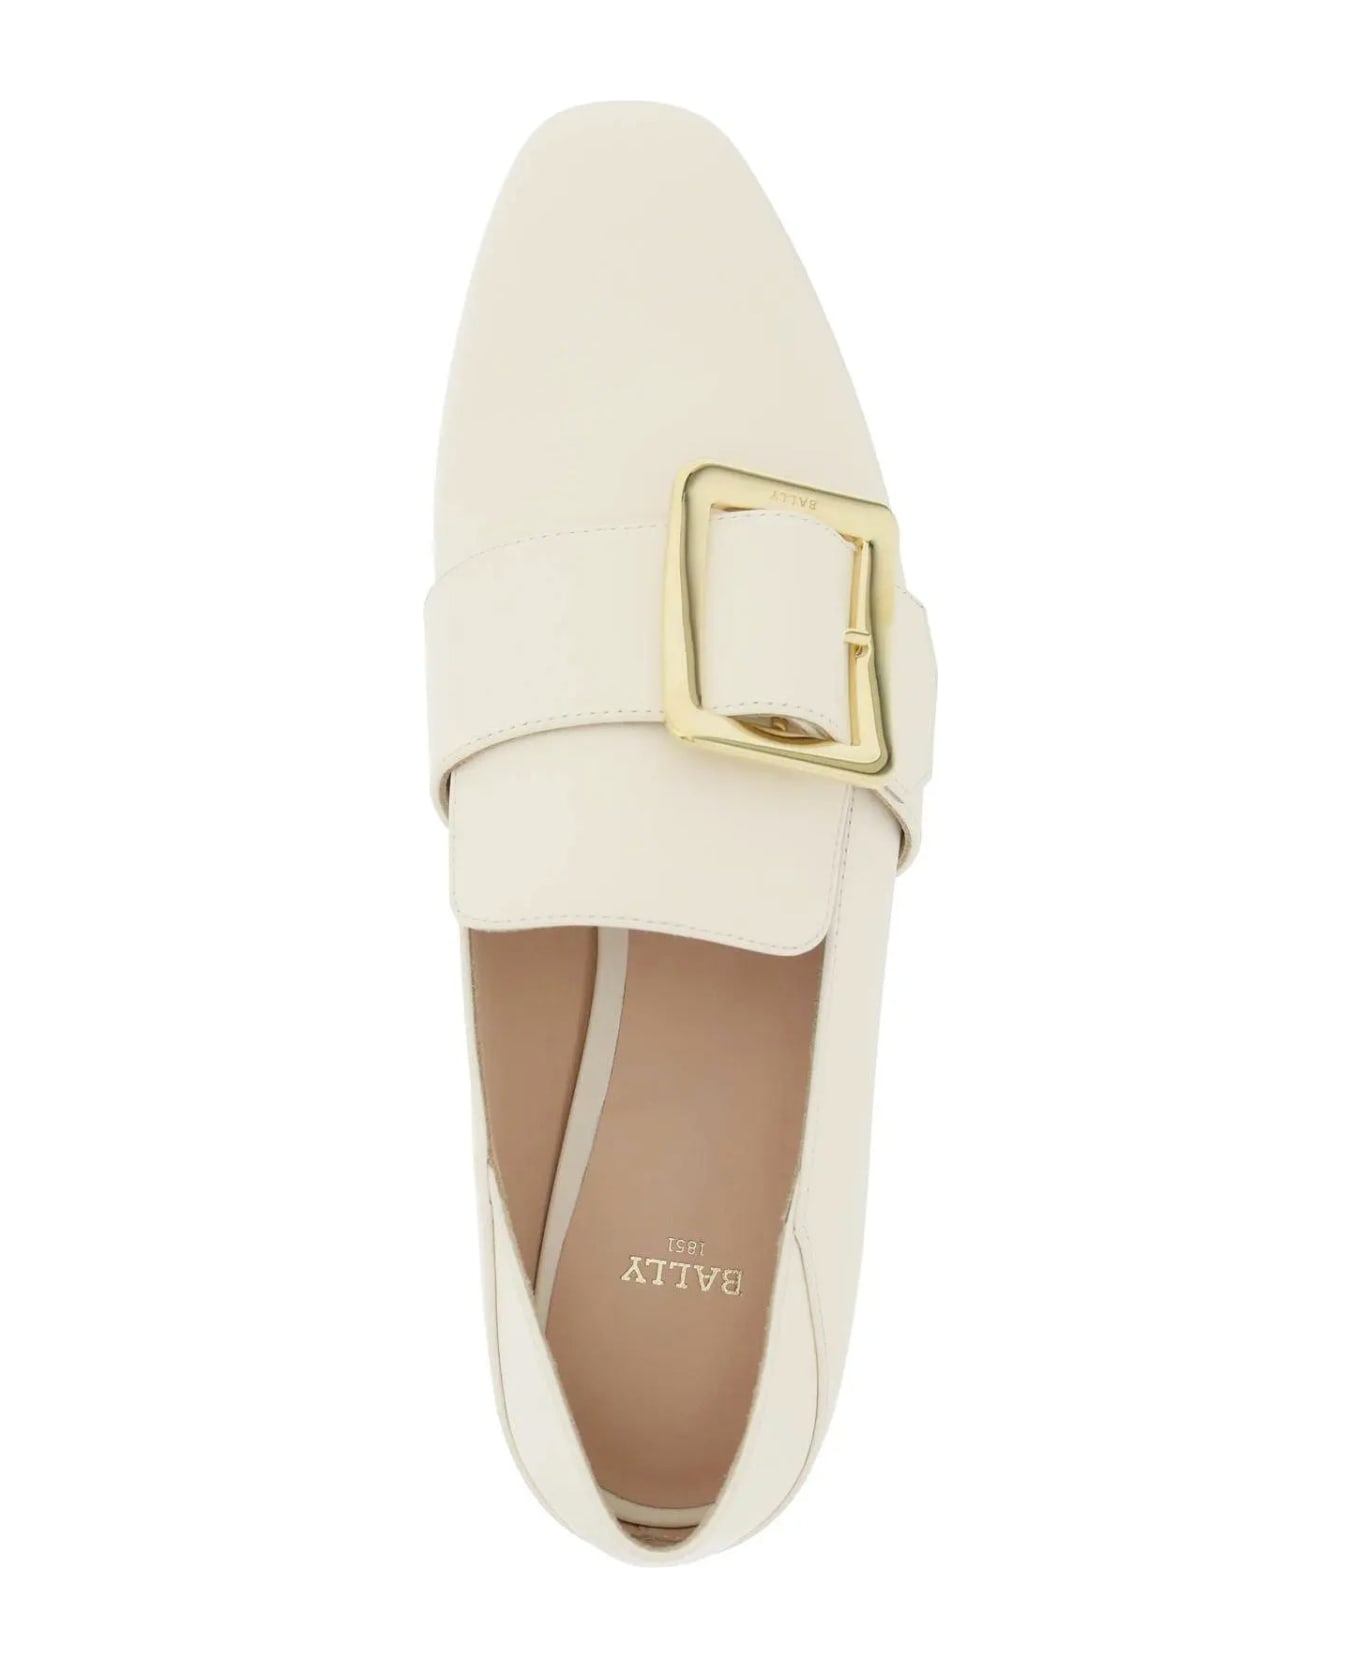 Bally Leather Loafers - White フラットシューズ